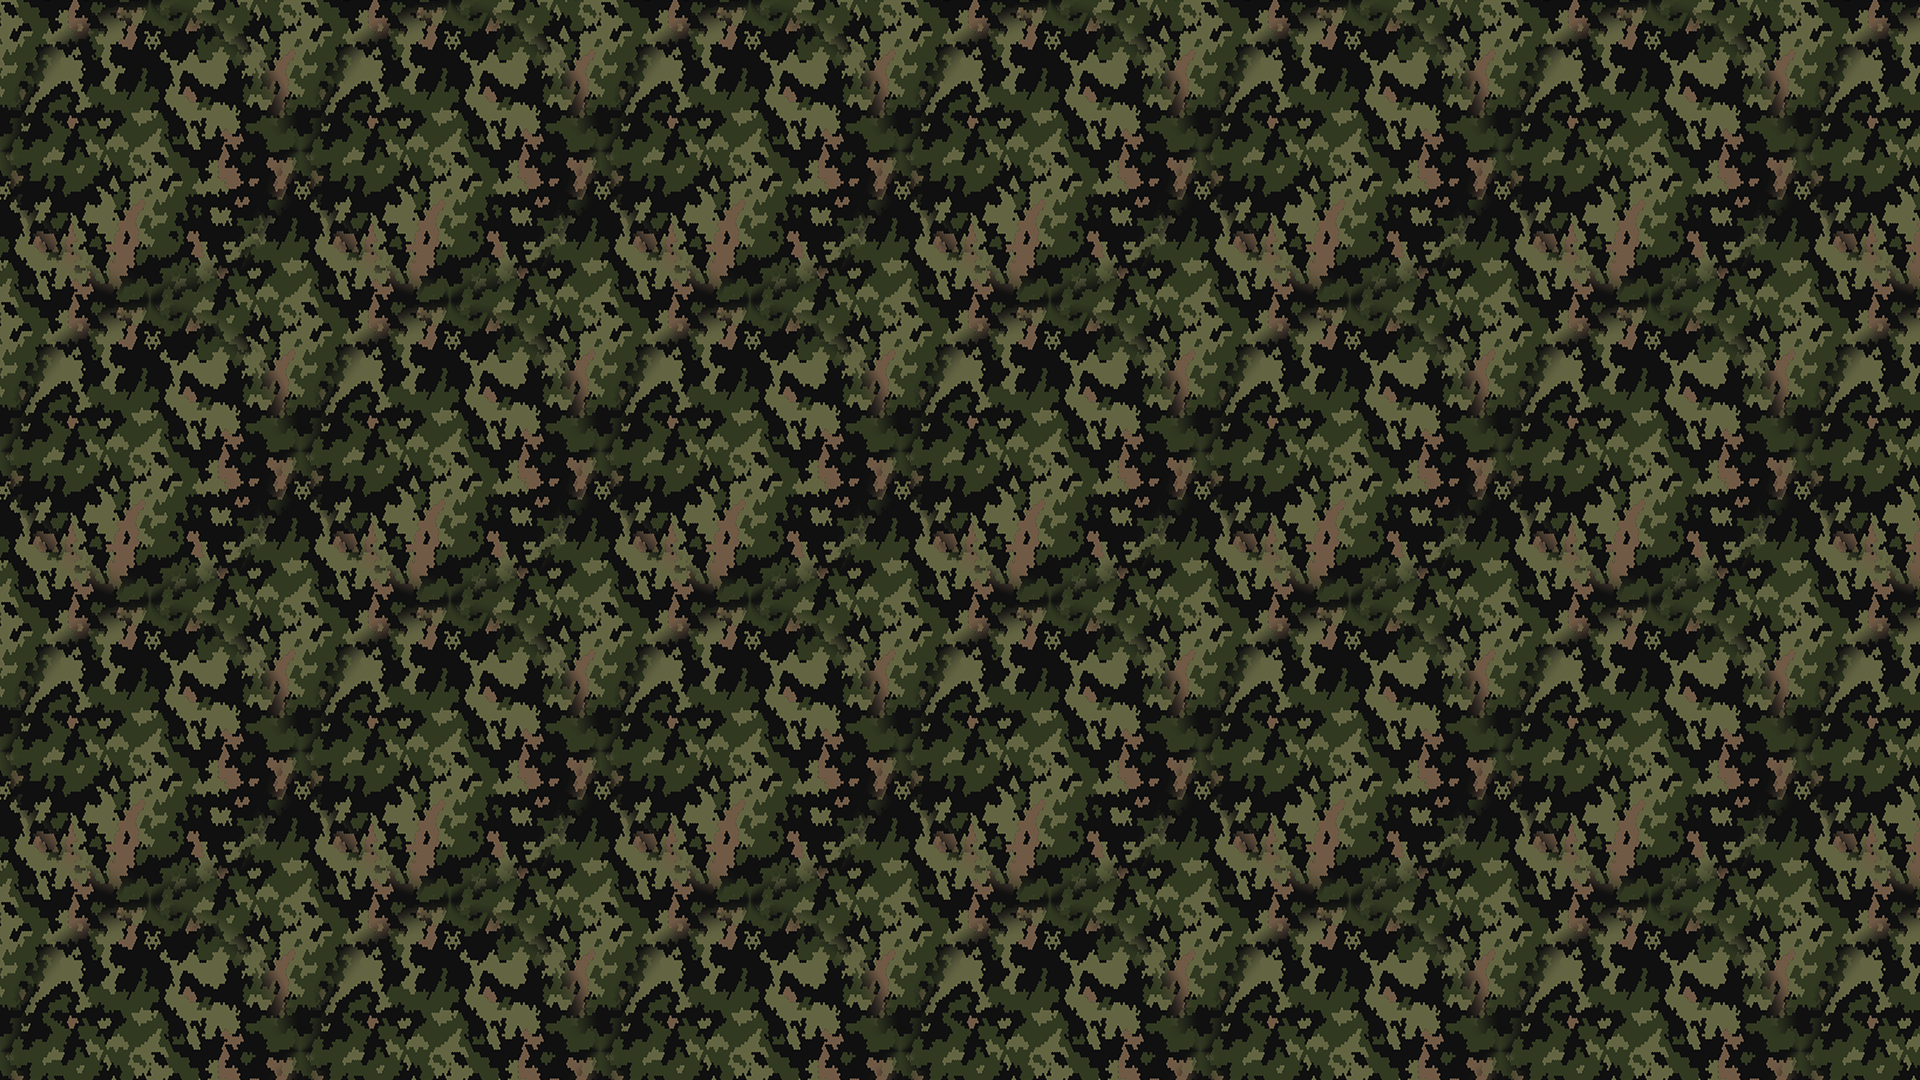 General 1920x1080 Arma 3 camouflage pattern